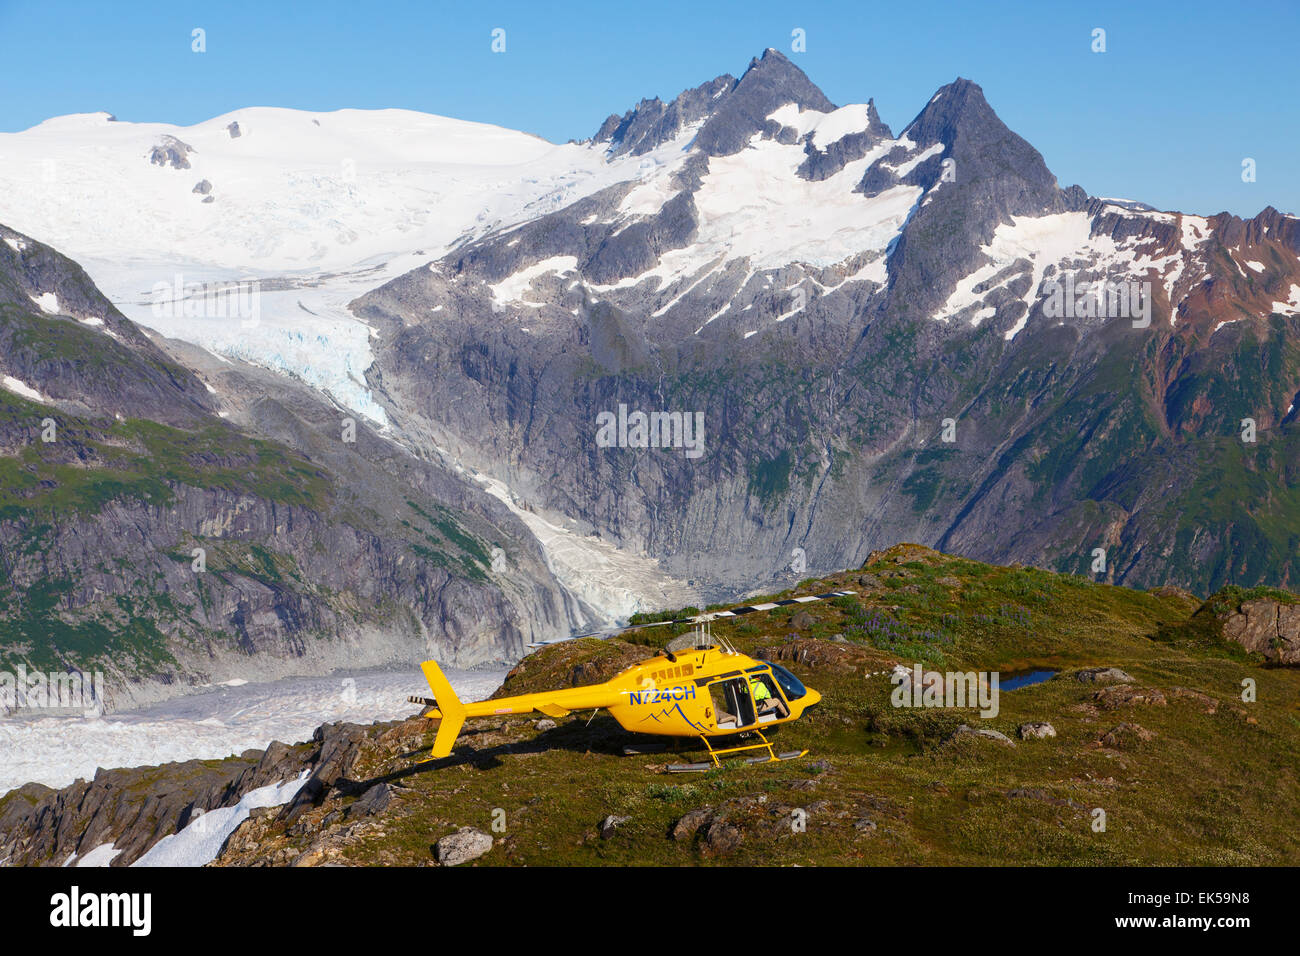 Helicopter on Mount Stroller White above the Mendenhall Glacier, Tongass National Forest, Alaska. Stock Photo